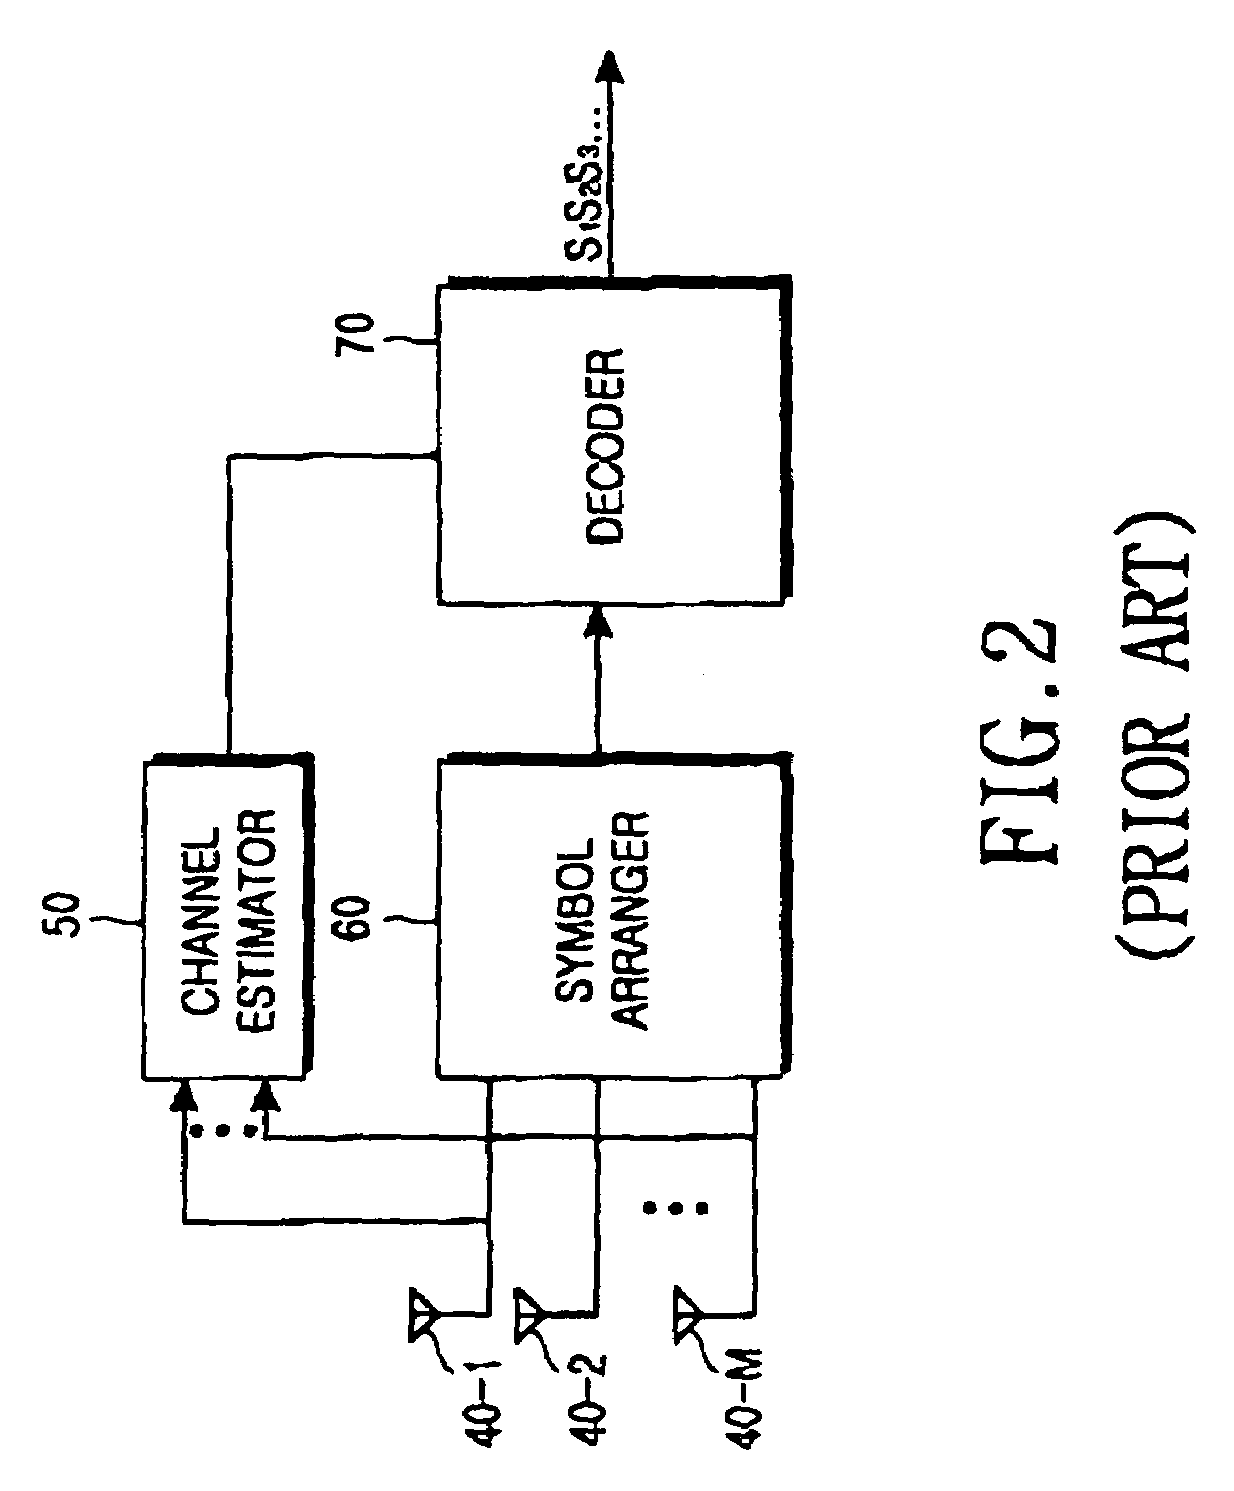 Transmitting and receiving apparatus for supporting transmit antenna diversity using space-time block code